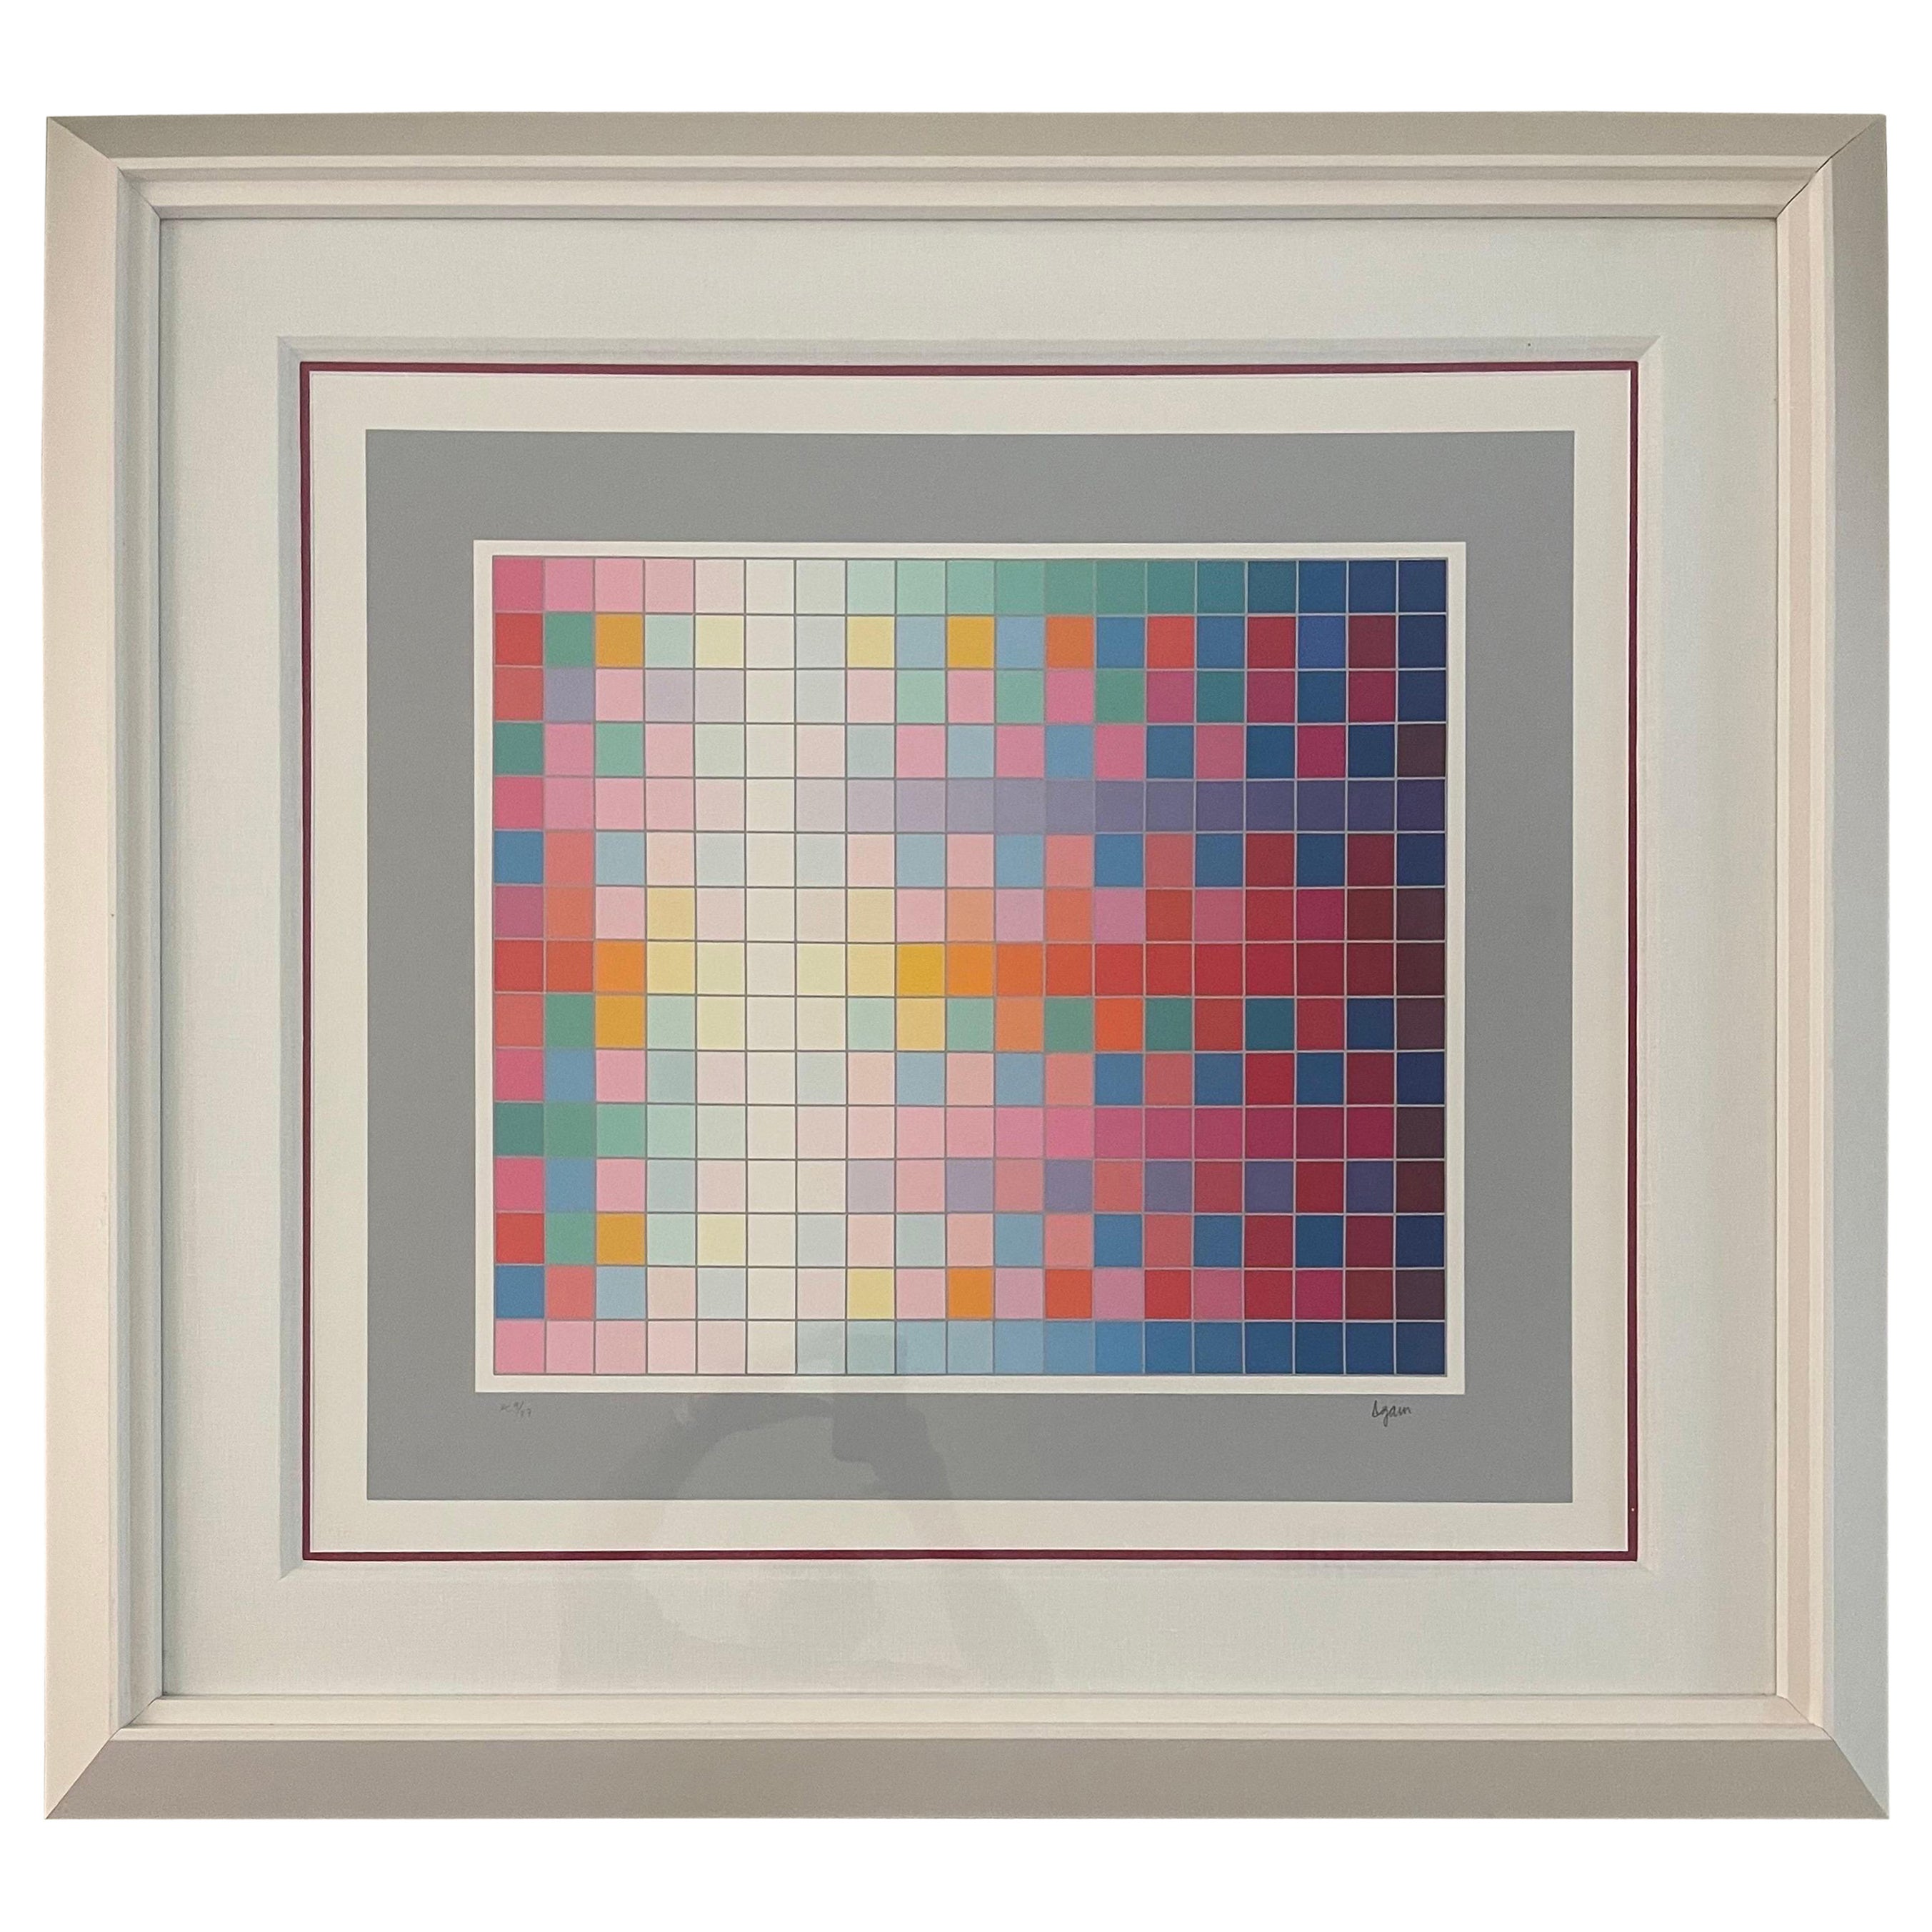 Signed Post-Modern Geometric Serigraph  Entitled "New Landscape" by Yaacov Agam